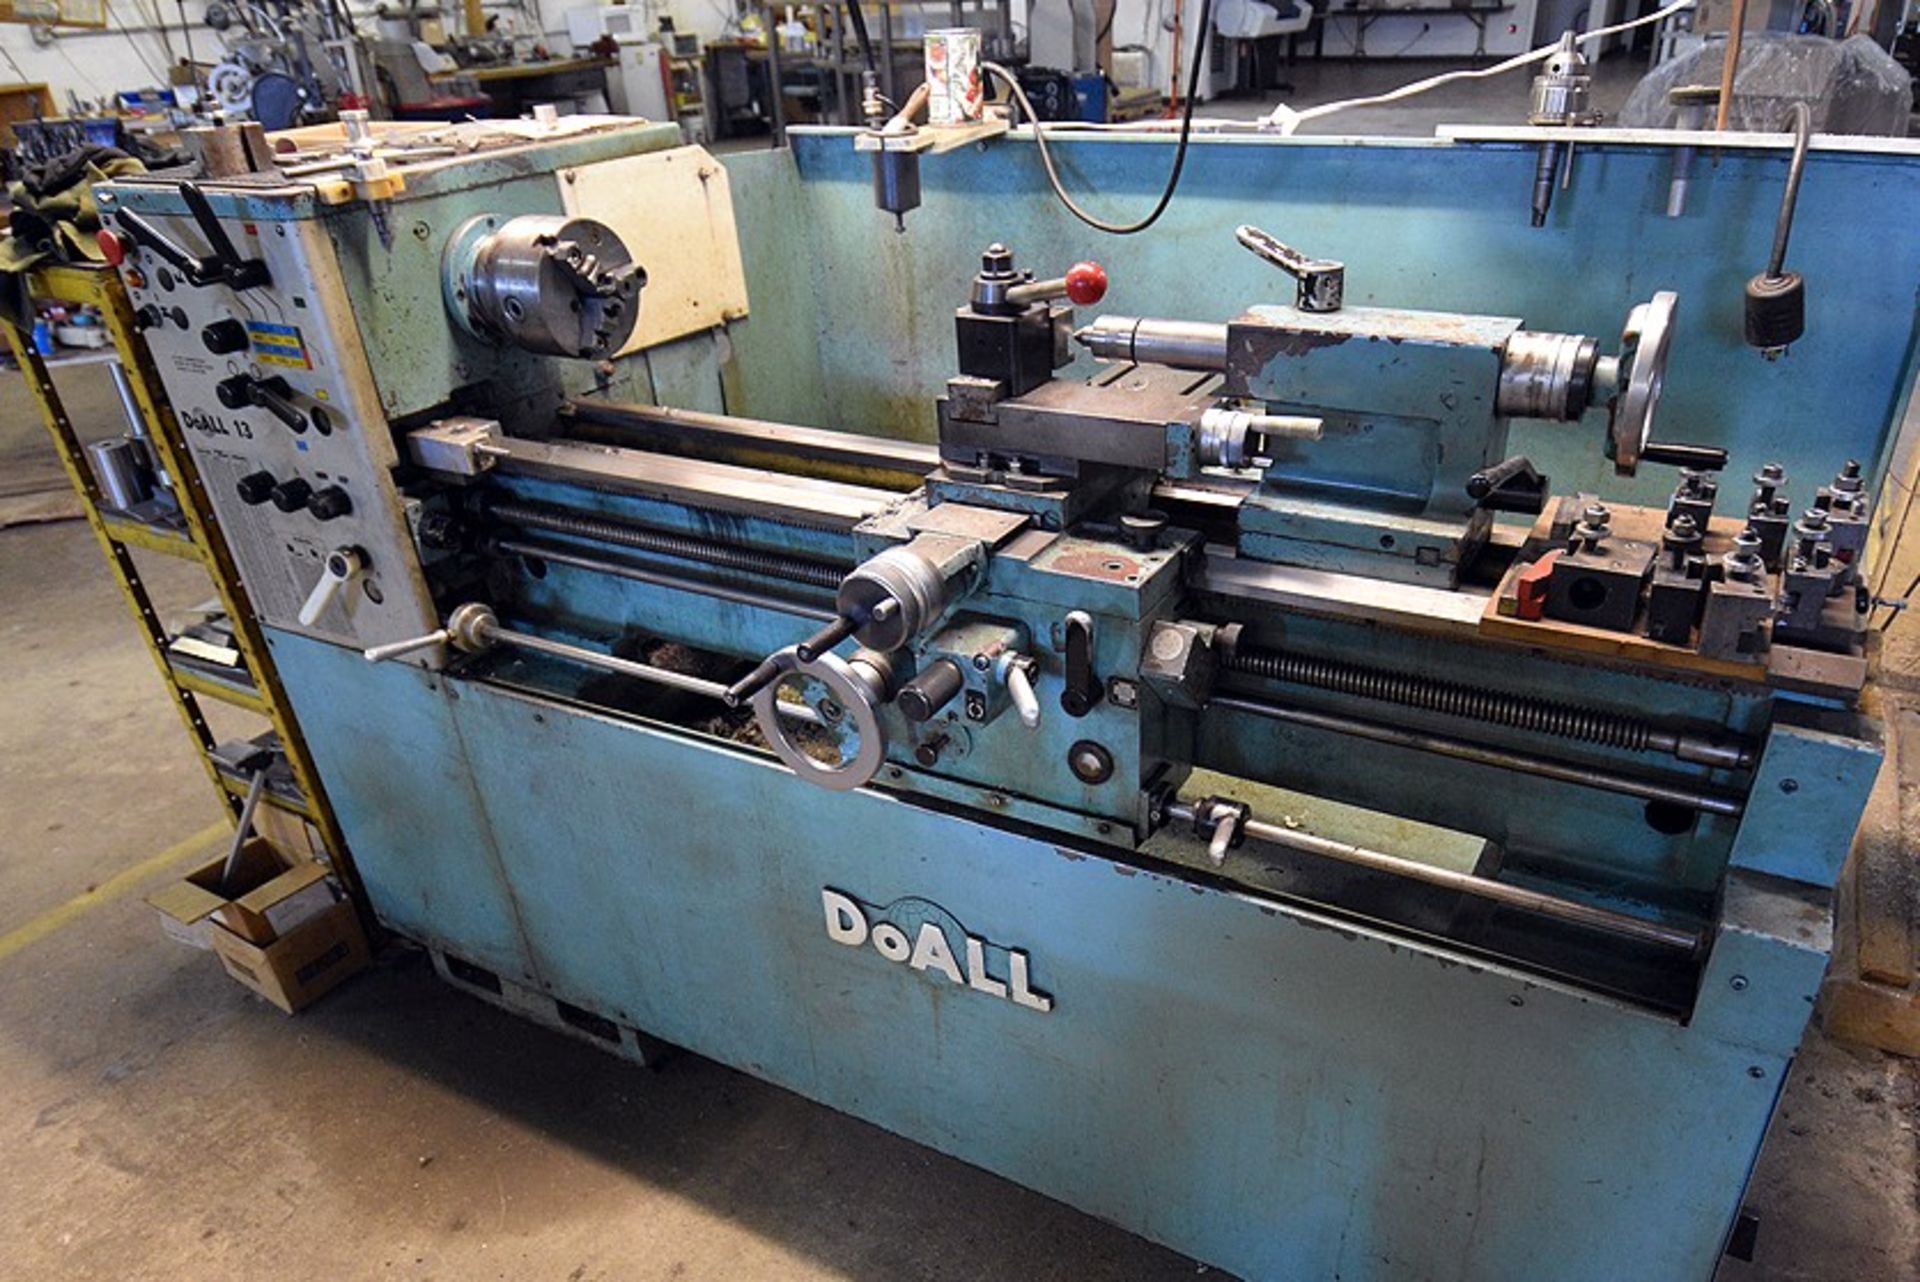 DoAll 13 engine lathe, s/n 0259070, 13” x 42”, w/ 3- jaw chuck, tool holder, tailstock